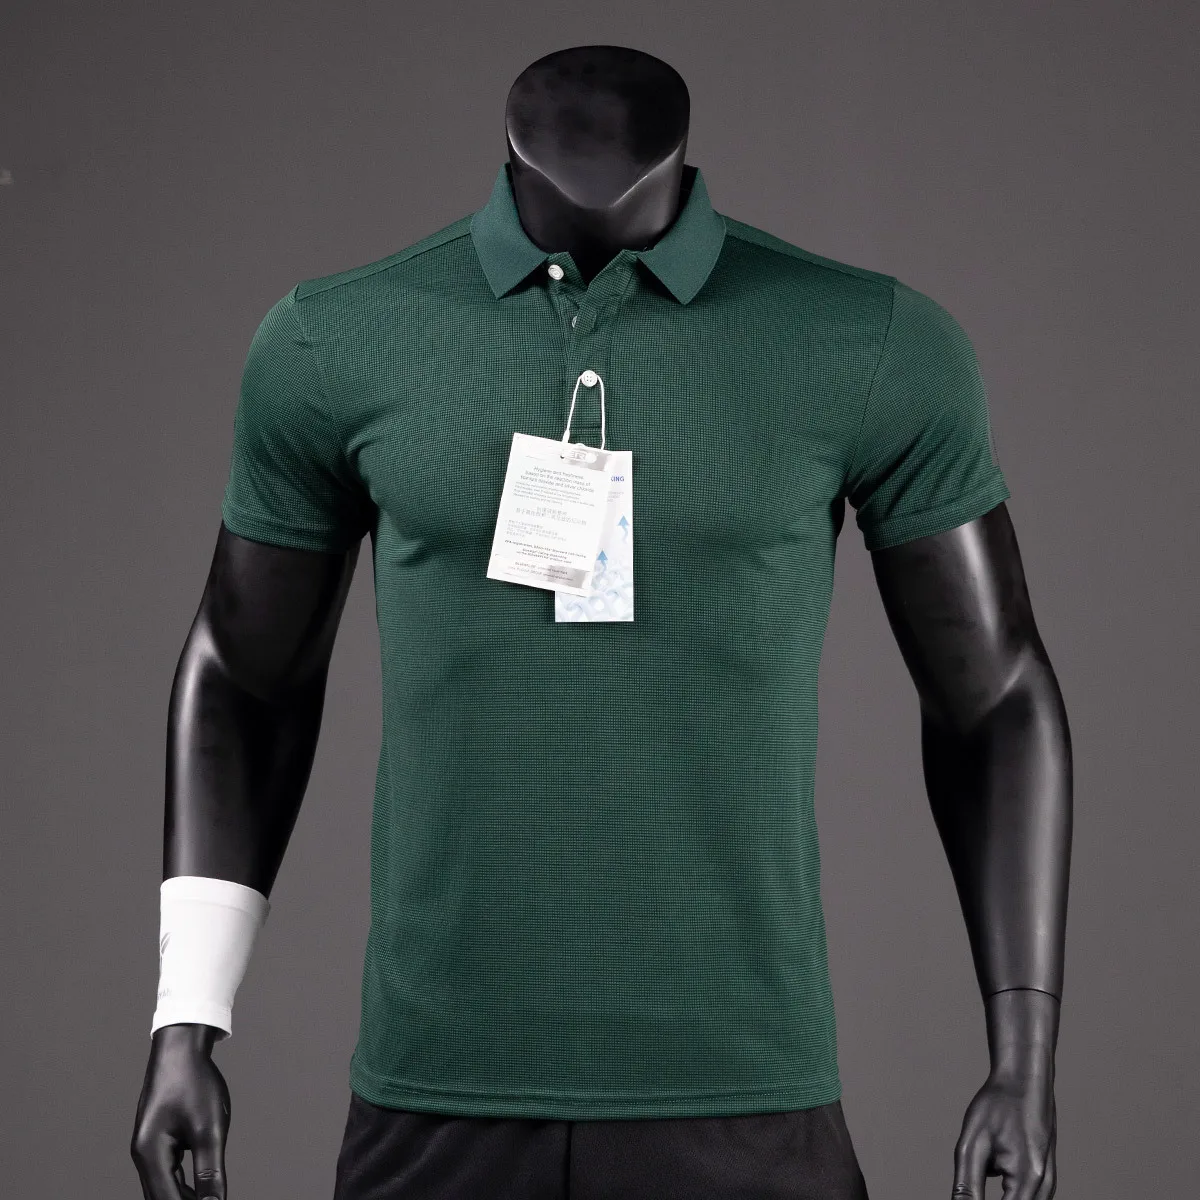 Men's Golf Shirt Luxury Functional Polo Shirt Quick-drying Perspiration Breathable Lapel Short-sleeved T-shirt for Man Summer 9